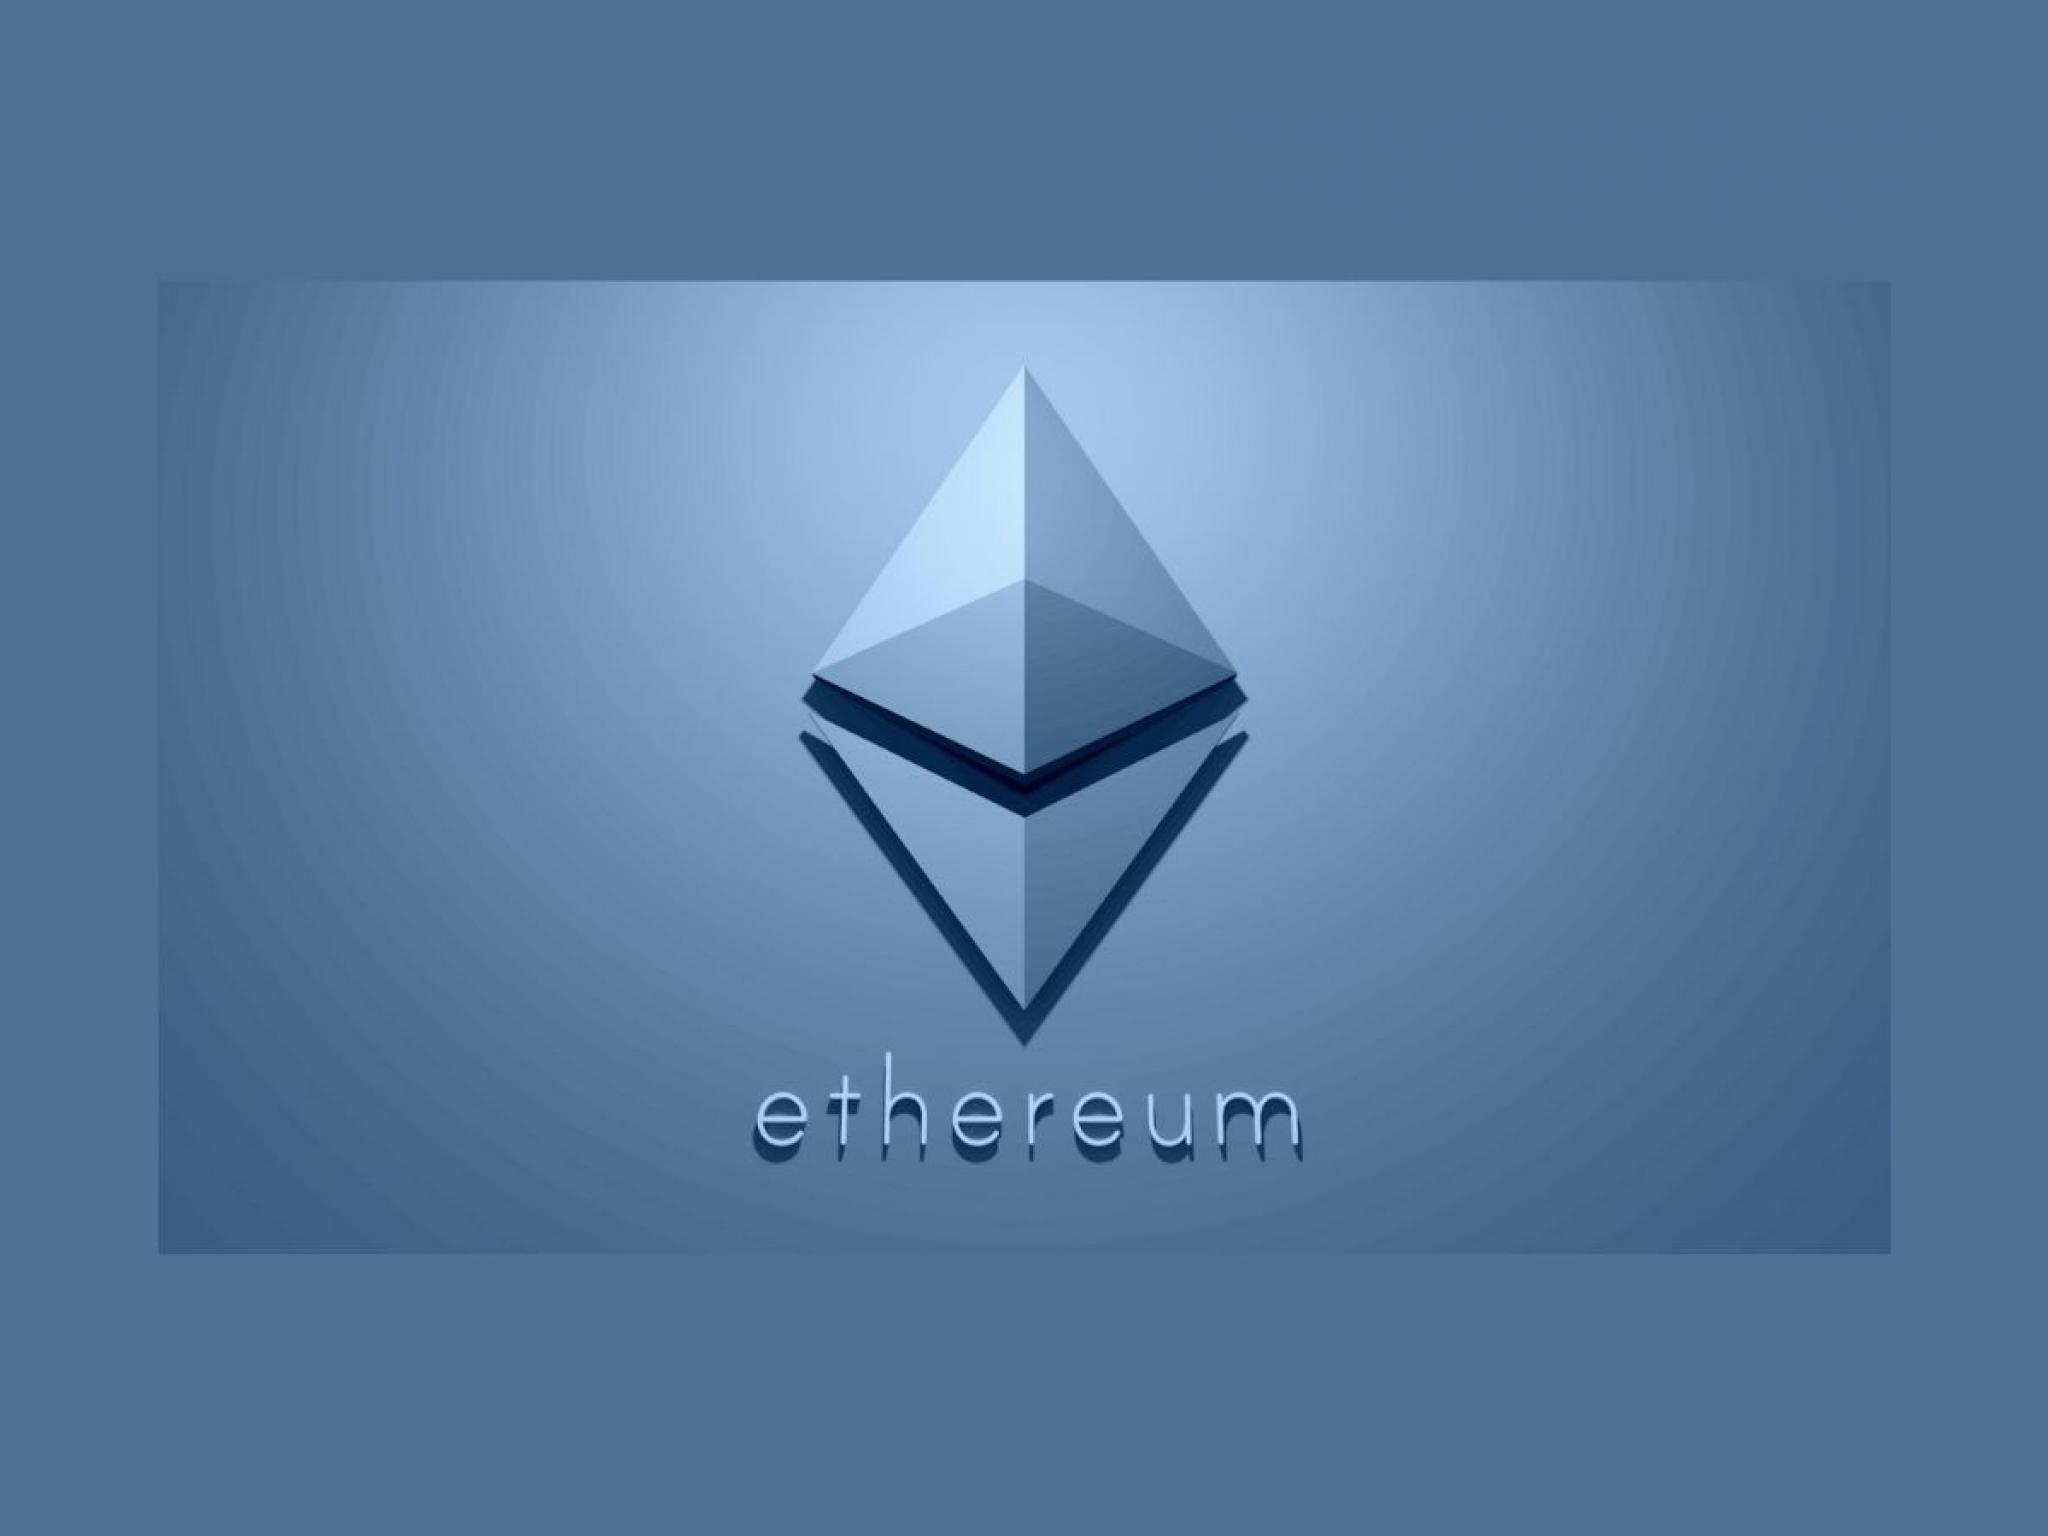  ethereum-edges-higher-bitcoin-sv-apecoin-among-top-gainers 